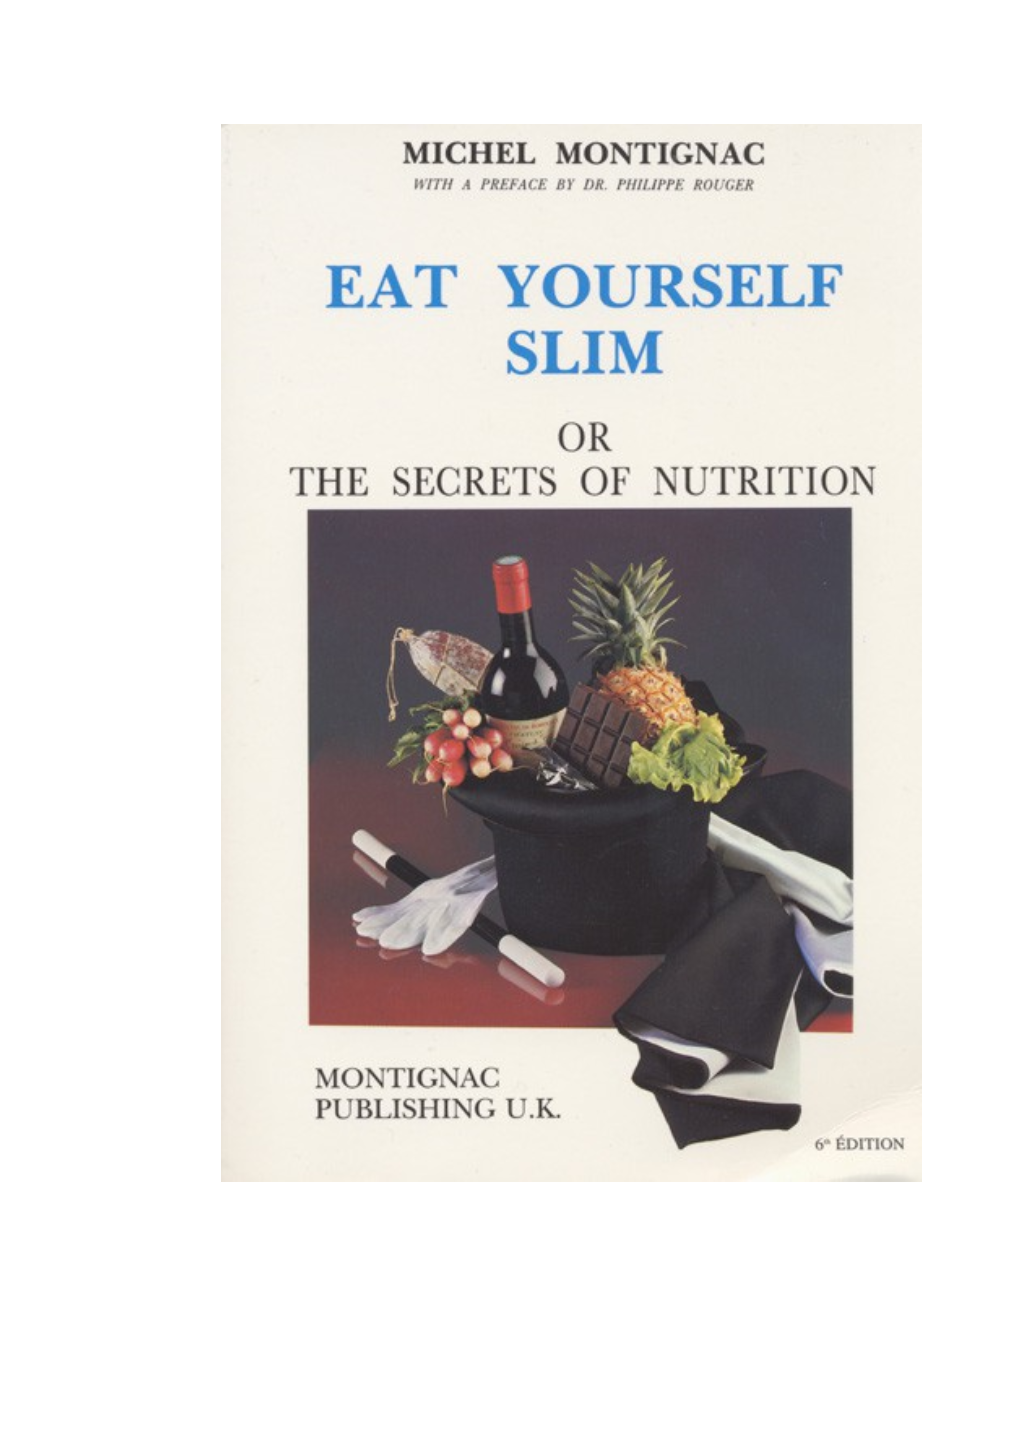 The Secrets of Nutrition